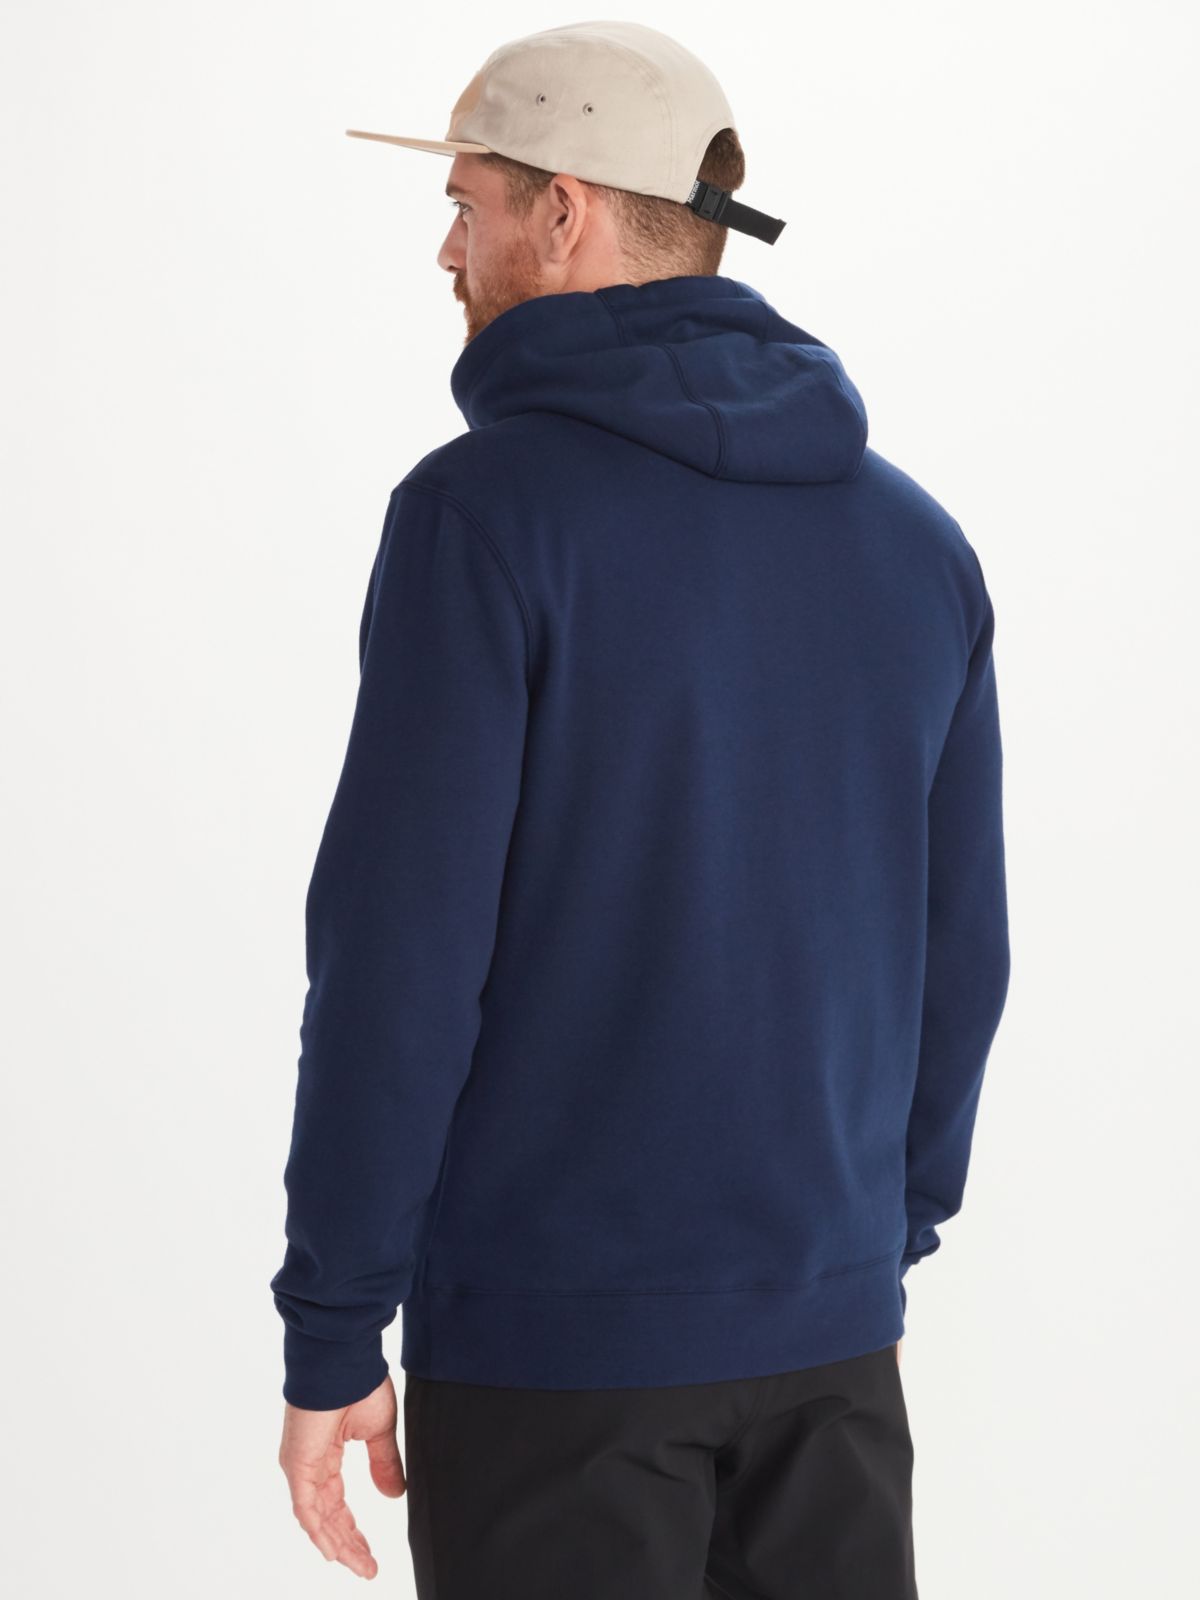 male model wearing pull over and hat